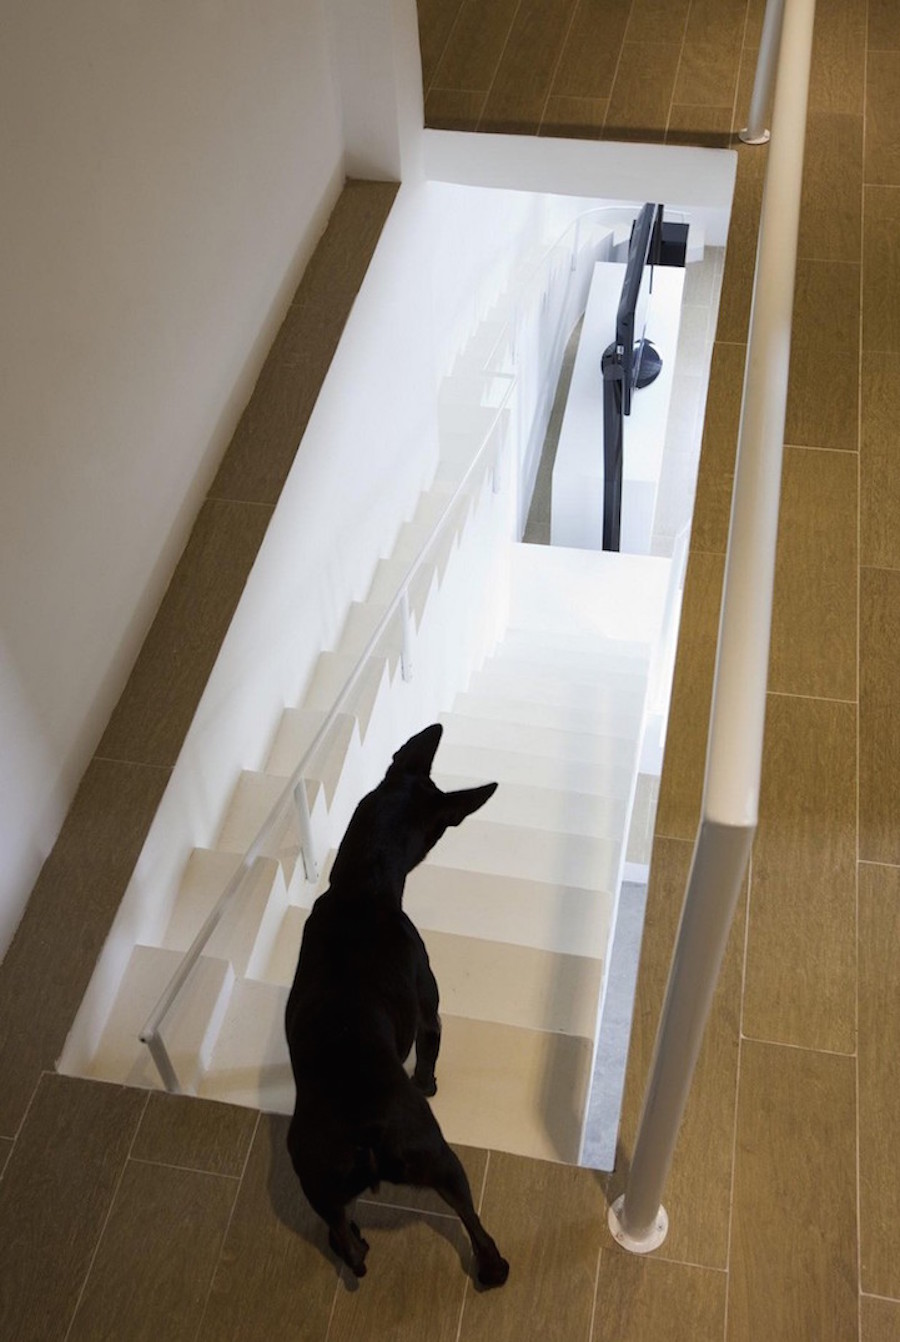 Staircase Designed for Small Pets5